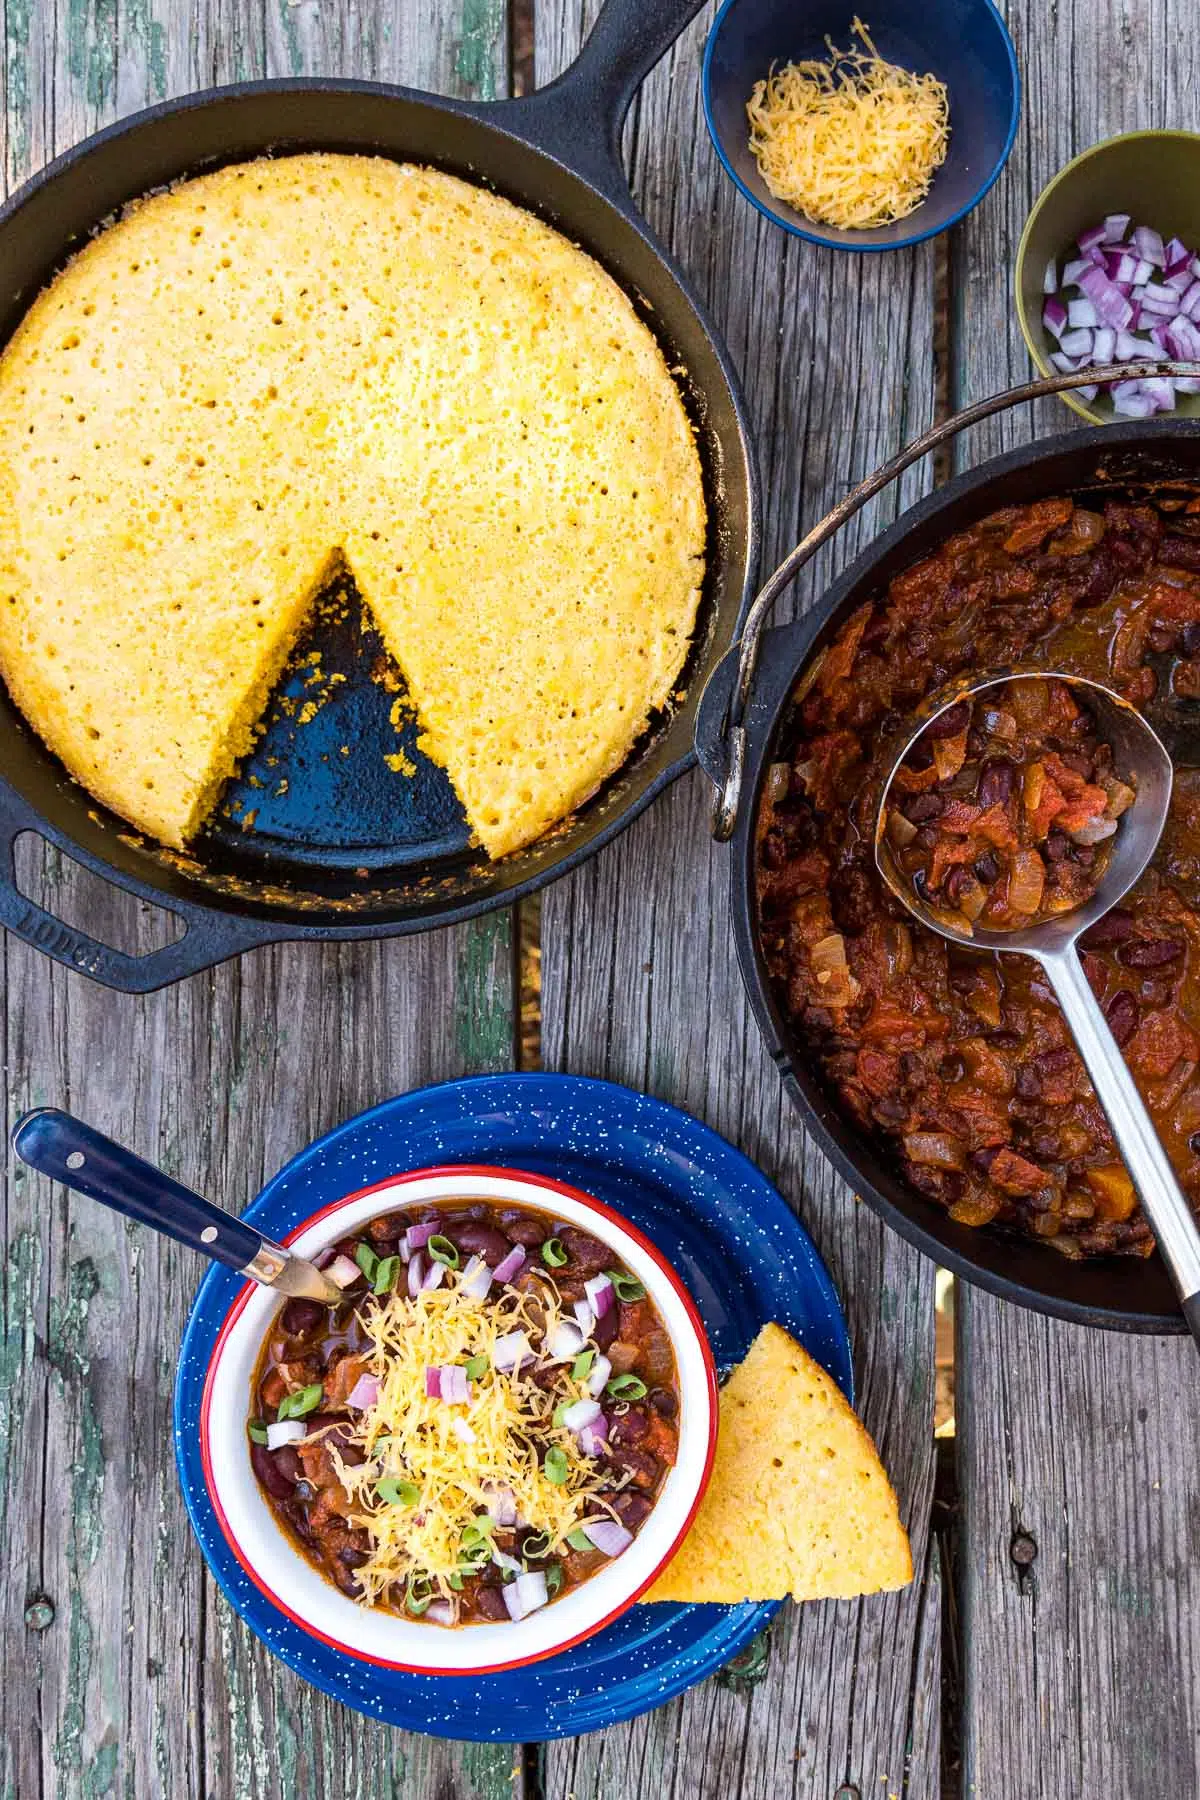 Cornbread in a skillet next to a bowl of chili with a slice of cornbread